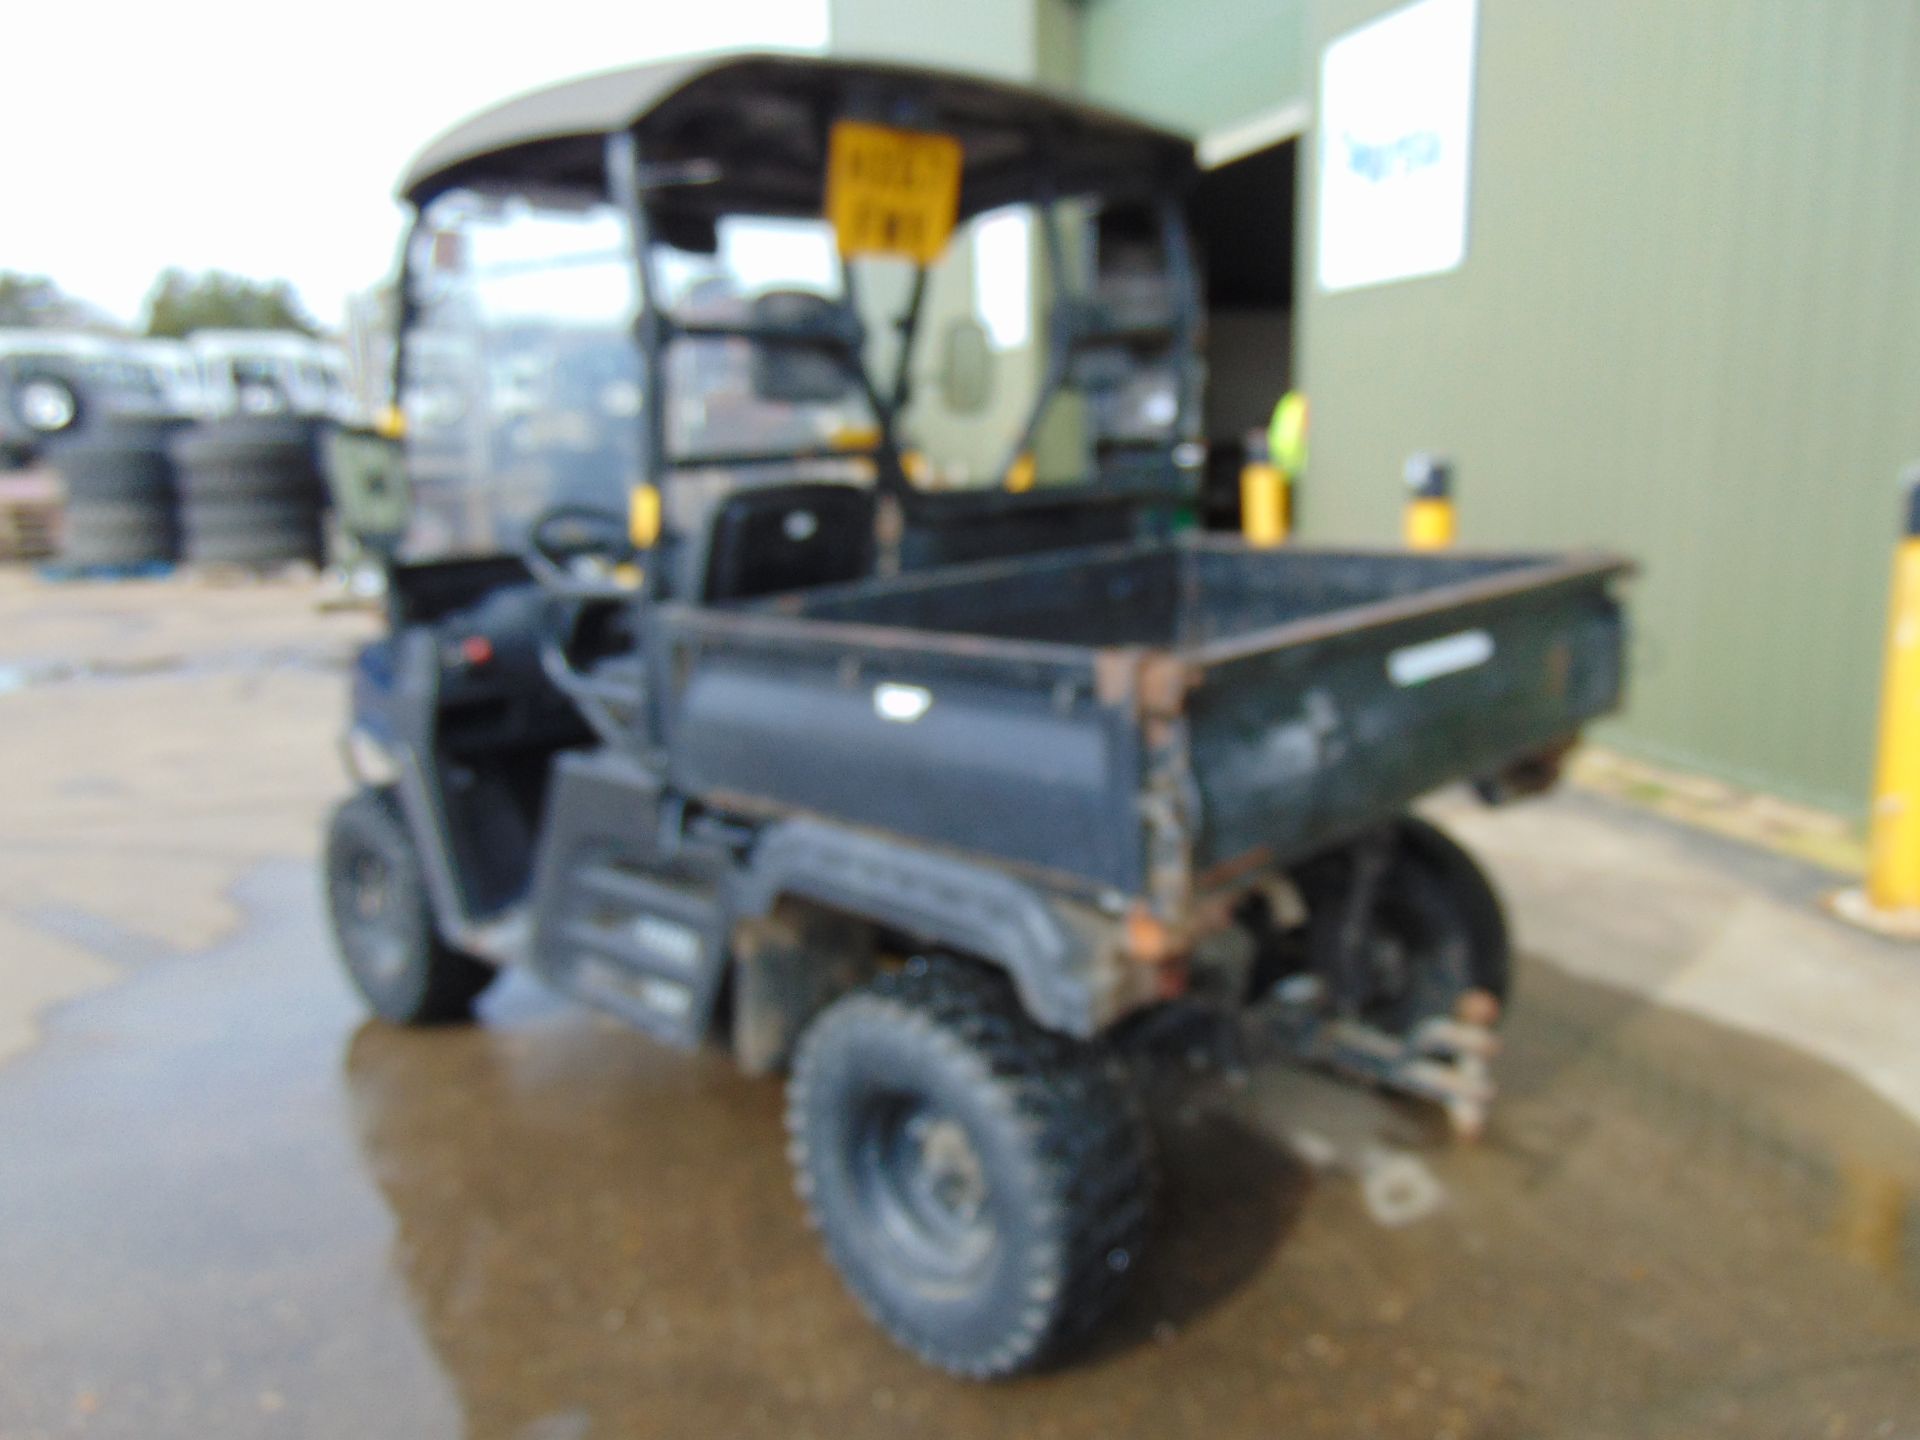 2017 Cushman XD1600 4x4 Diesel Utility Vehicle Showing 786 hrs - Image 9 of 18